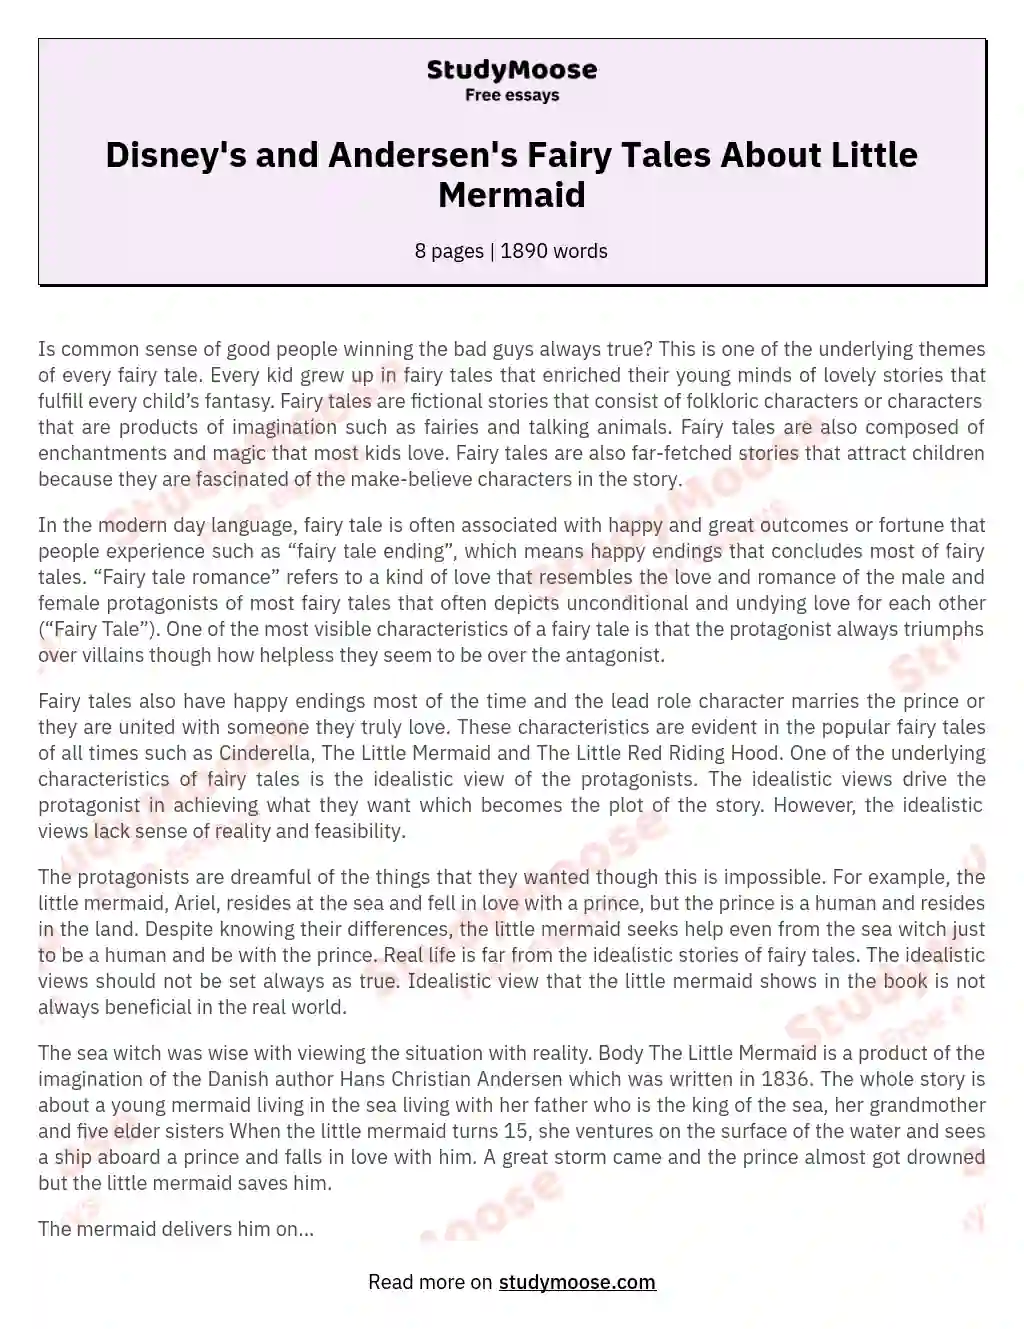 Disney's and Andersen's Fairy Tales About Little Mermaid essay